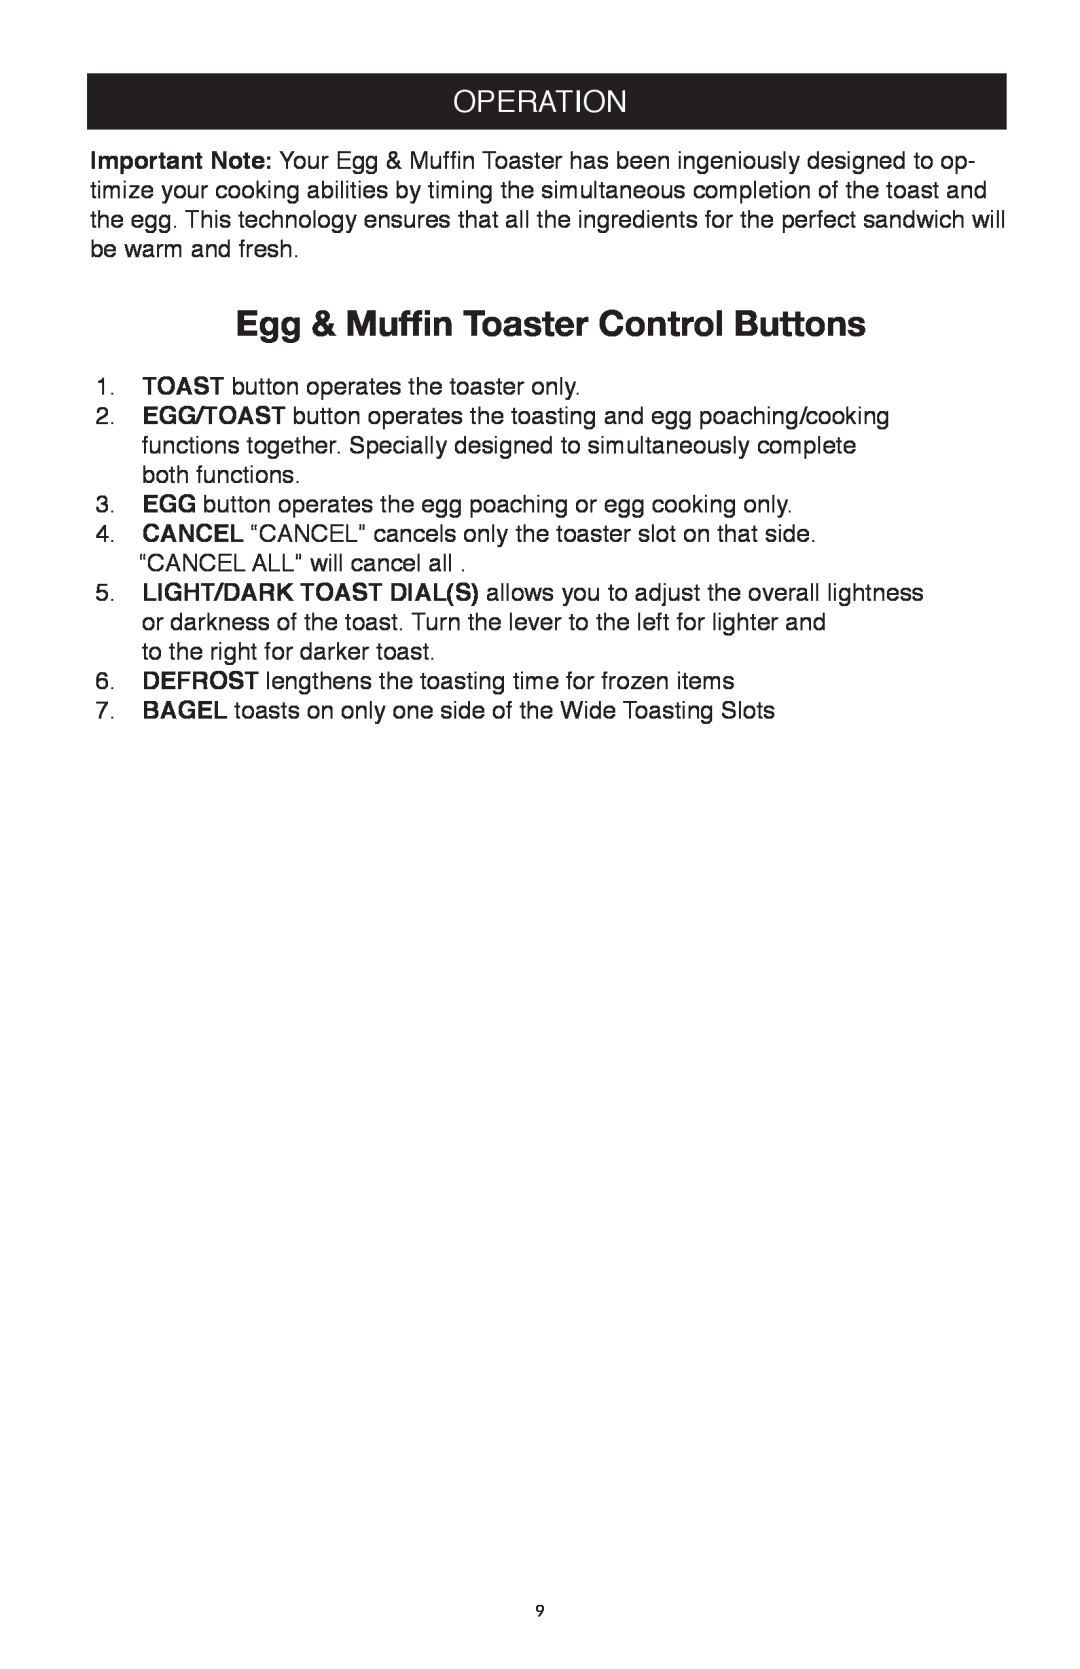 West Bend Back to Basics TEM4500 manual Egg & Mufﬁn Toaster Control Buttons, Operation 